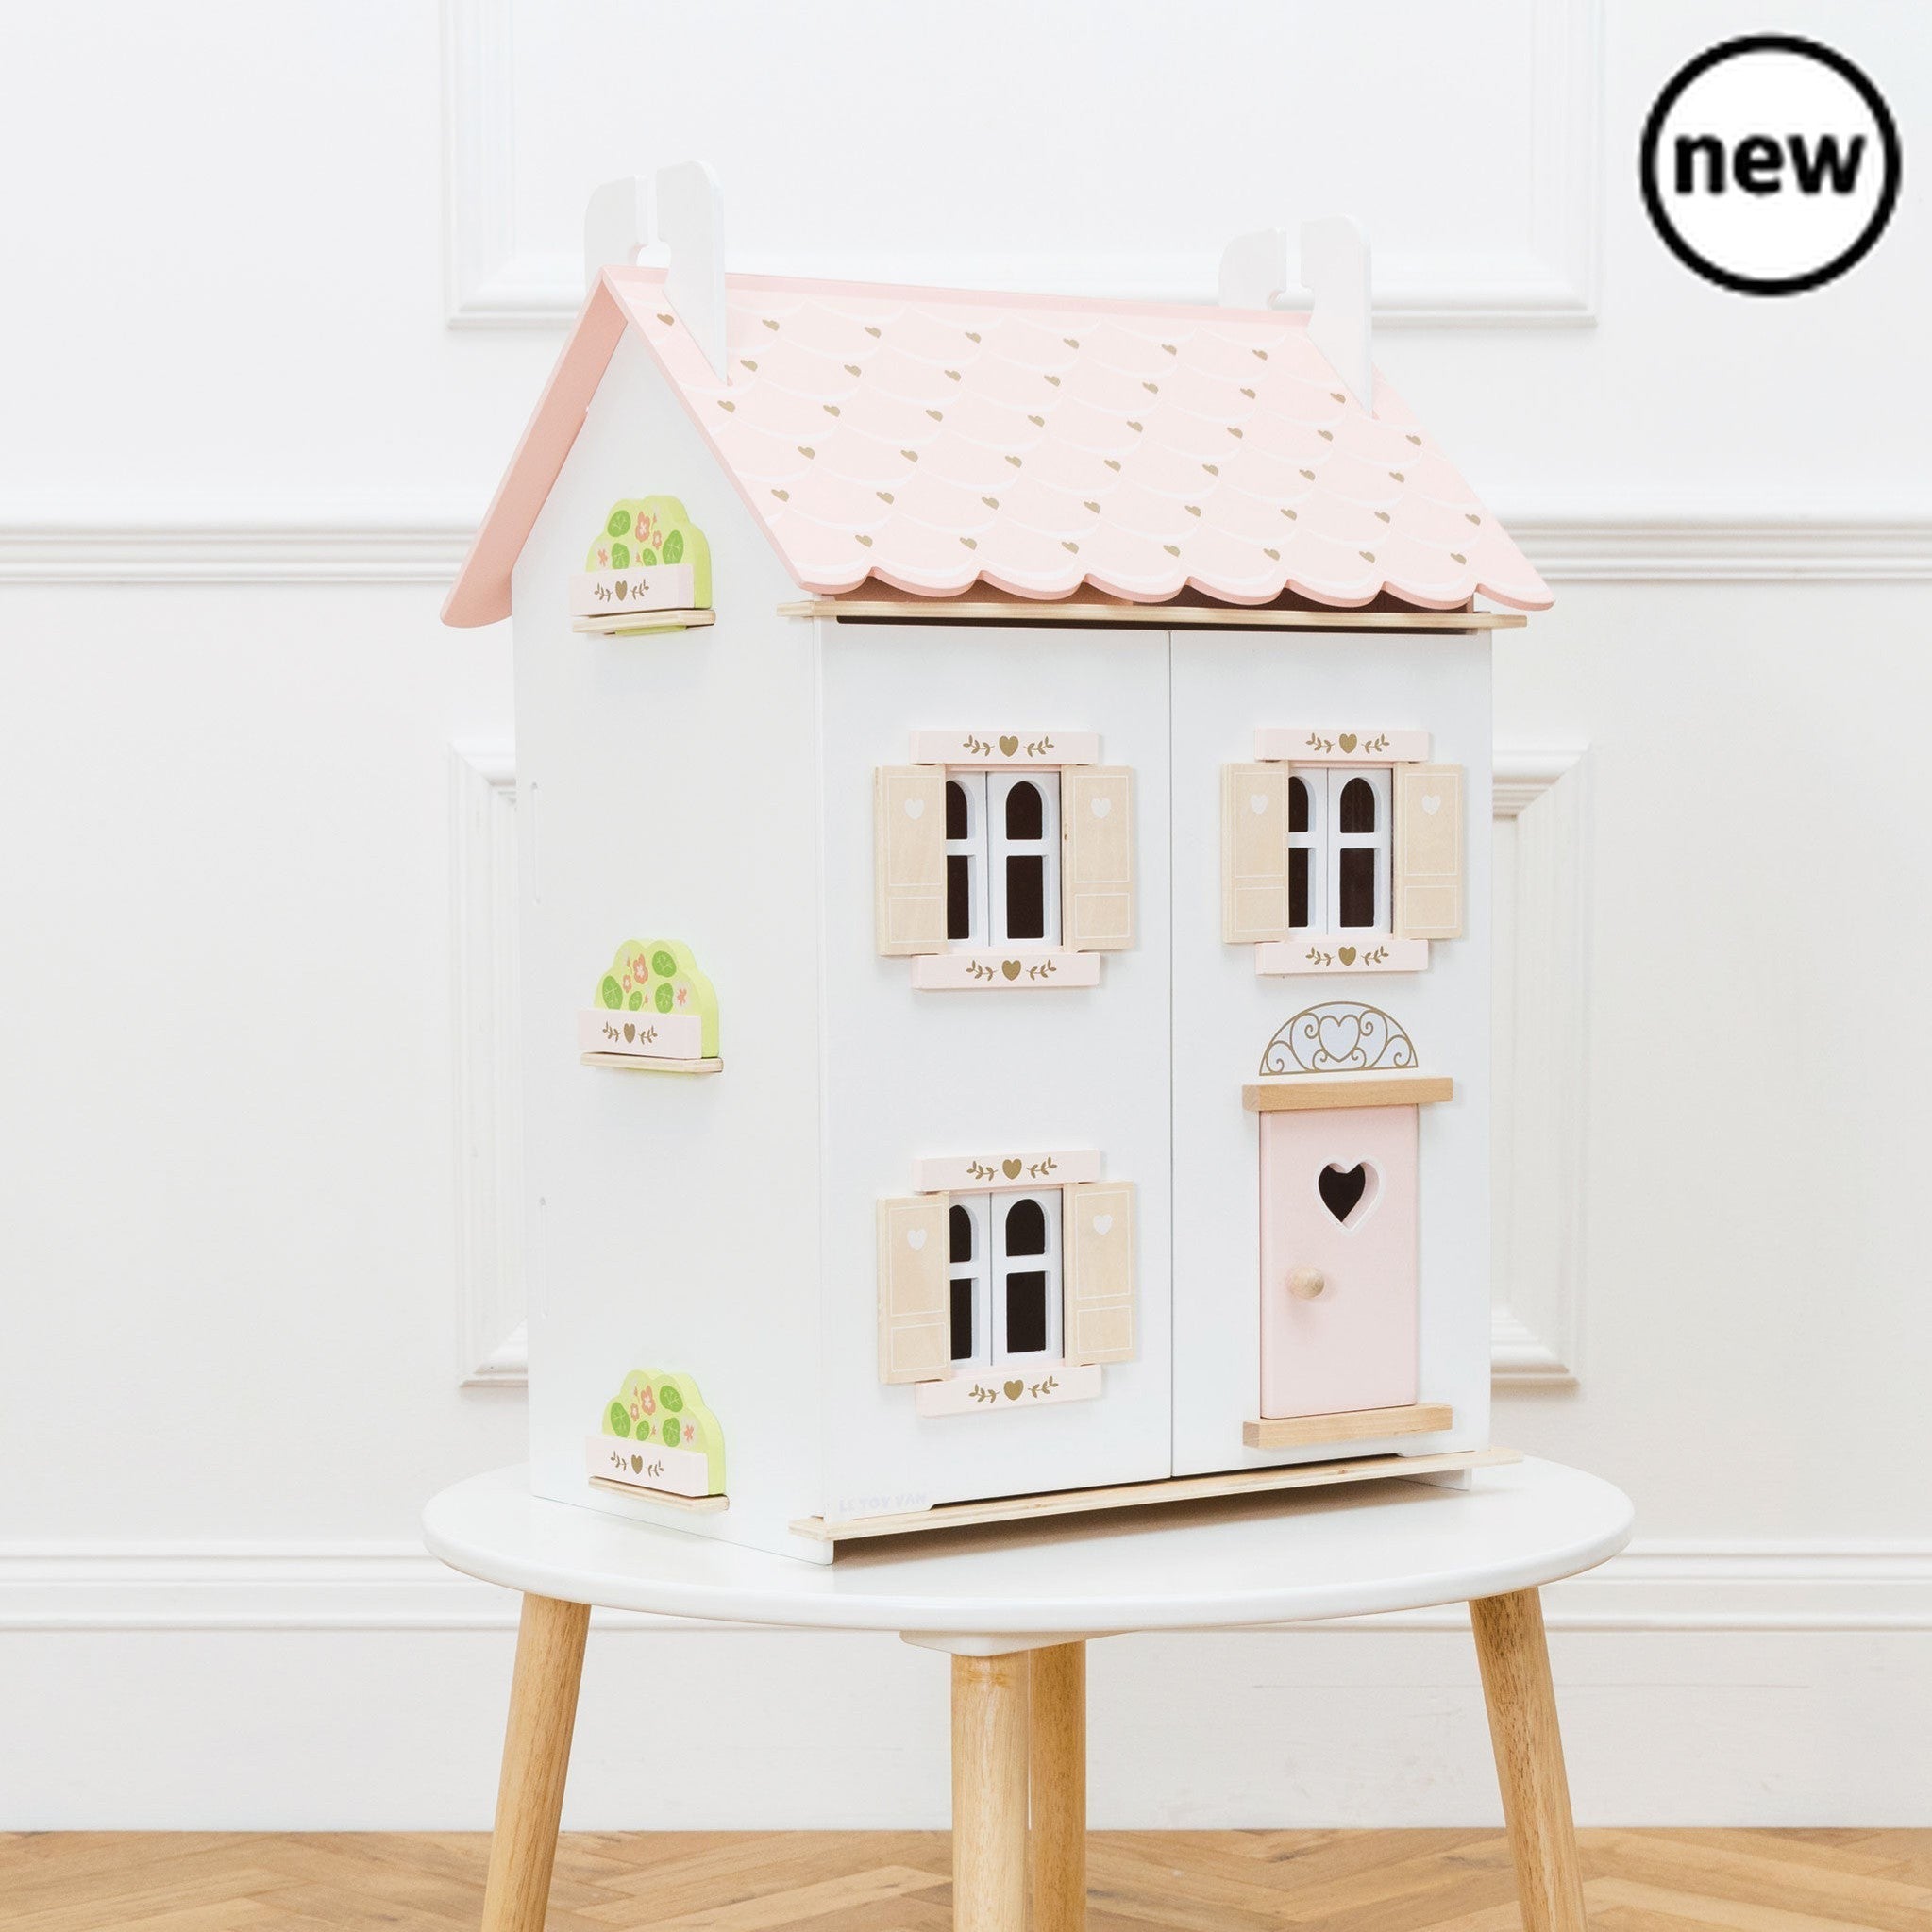 Rose Heart House, Description Welcome home. This delightful dolls house makes a stunning gift for a special little someone. Painted in fresh white with soft pink accents and gold heart motifs, it is ready to move right in to. Crafted from sustainable FSC® - certified wood, this durable, high quality toy features a scalloped roof, opening and closing doors and shutters for realistic play, plus a clever lift off roof that reveals access to a sweet attic bedroom. Inside, the floors are furnished in a lovely na